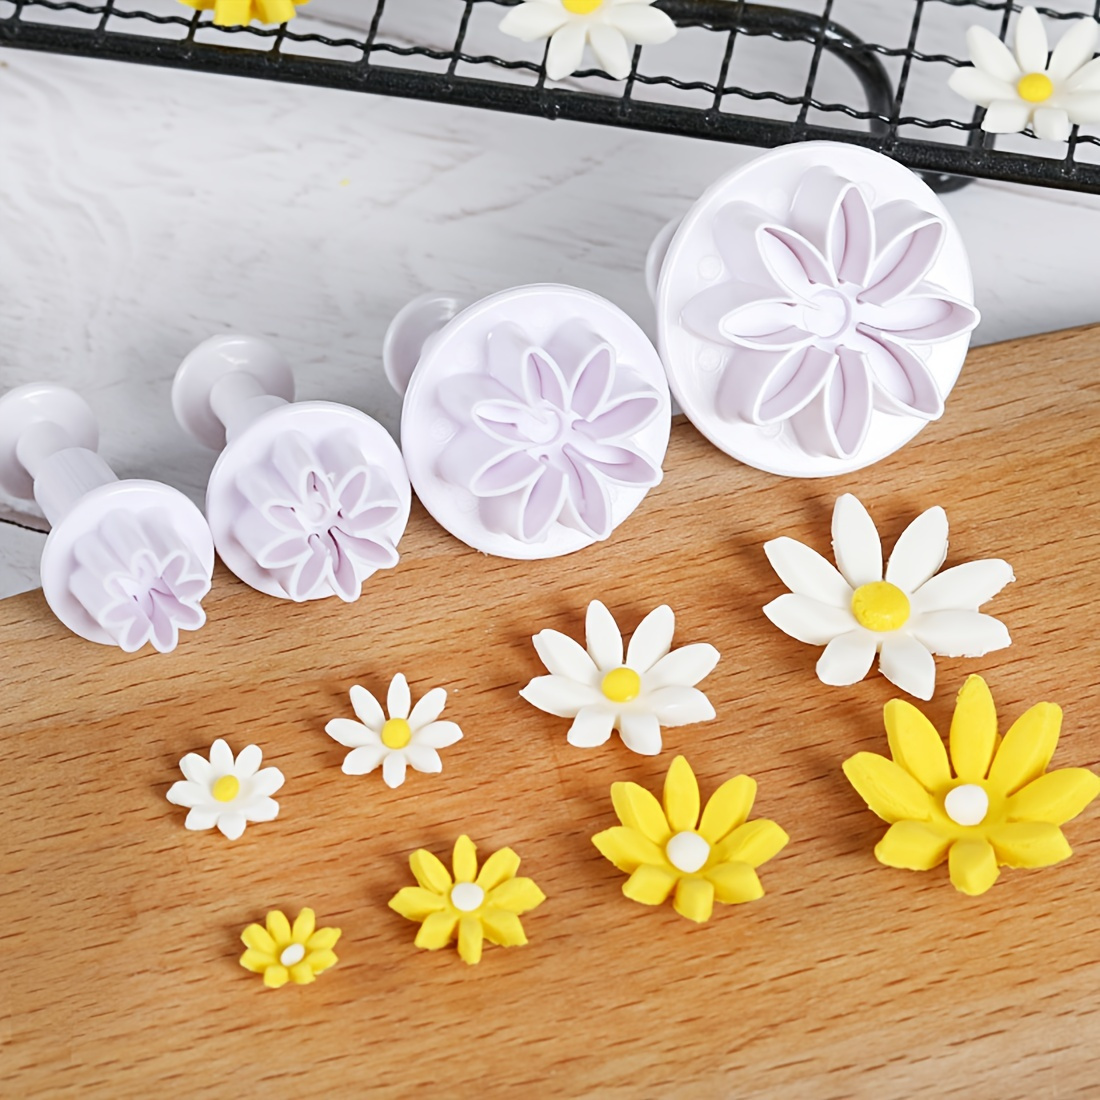 

4pcs Flower Shaped Fondant Molds For Diy Cake And Cookie Decorating - Perfect Baking Tools For Candy And Craft Projects